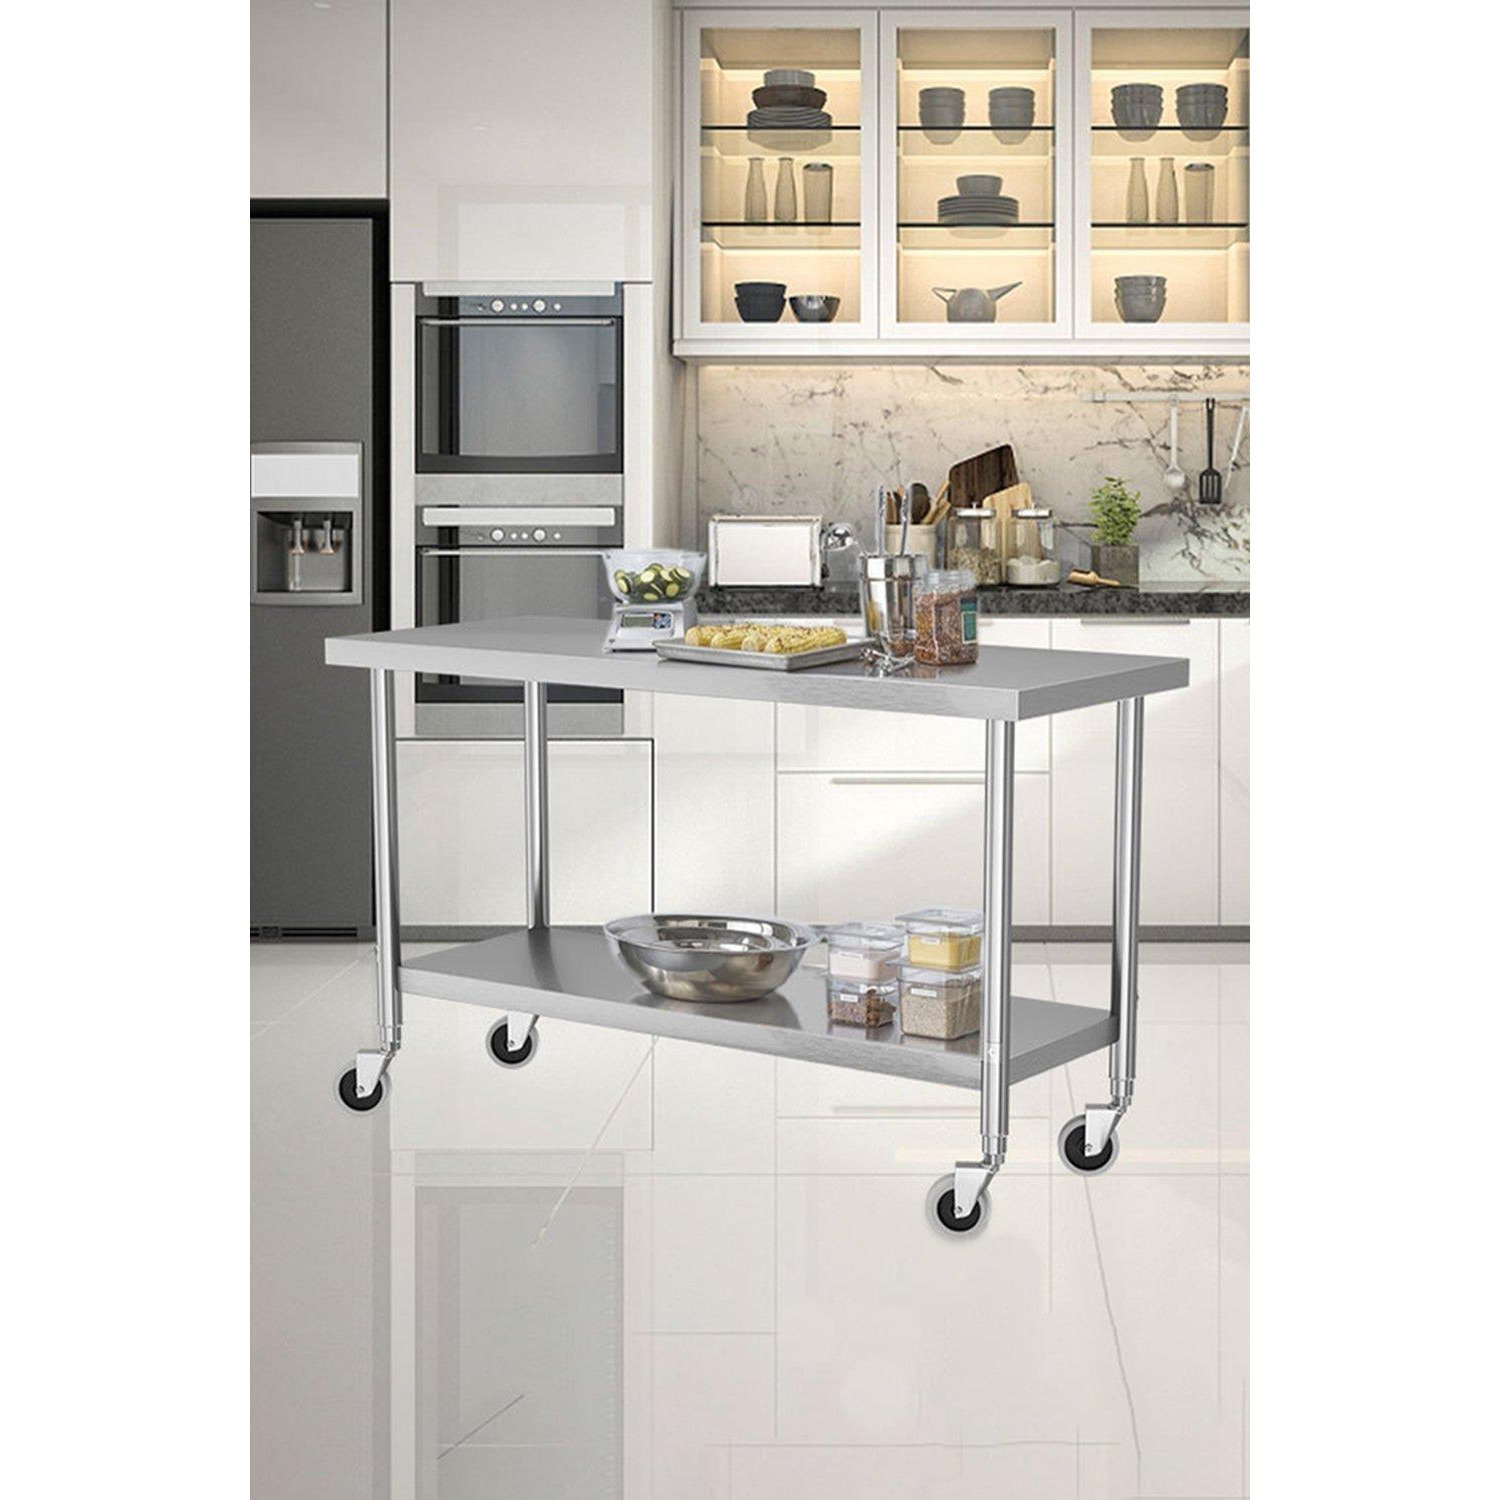 2 Tier Commercial Kitchen Prep Worktable with Wheels - image 1